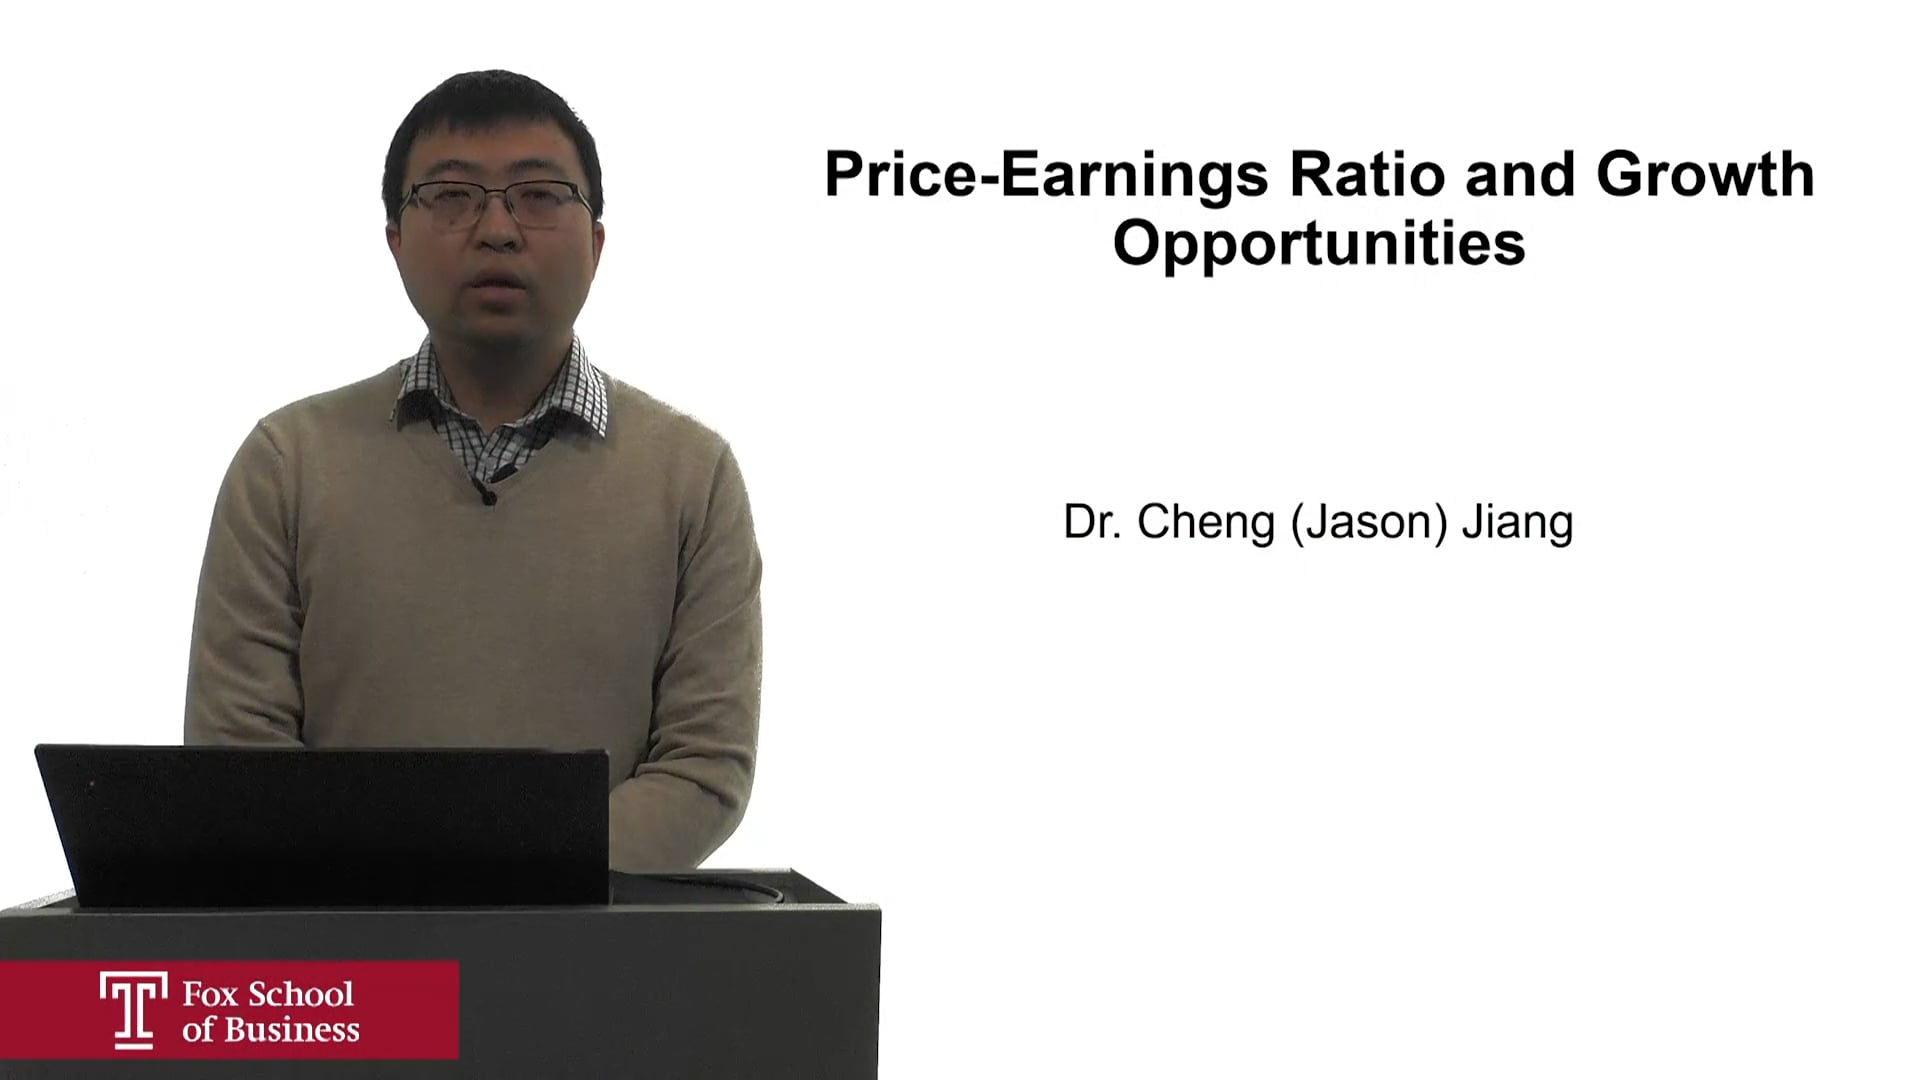 Price-Earnings Ratio and Growth Opportunities